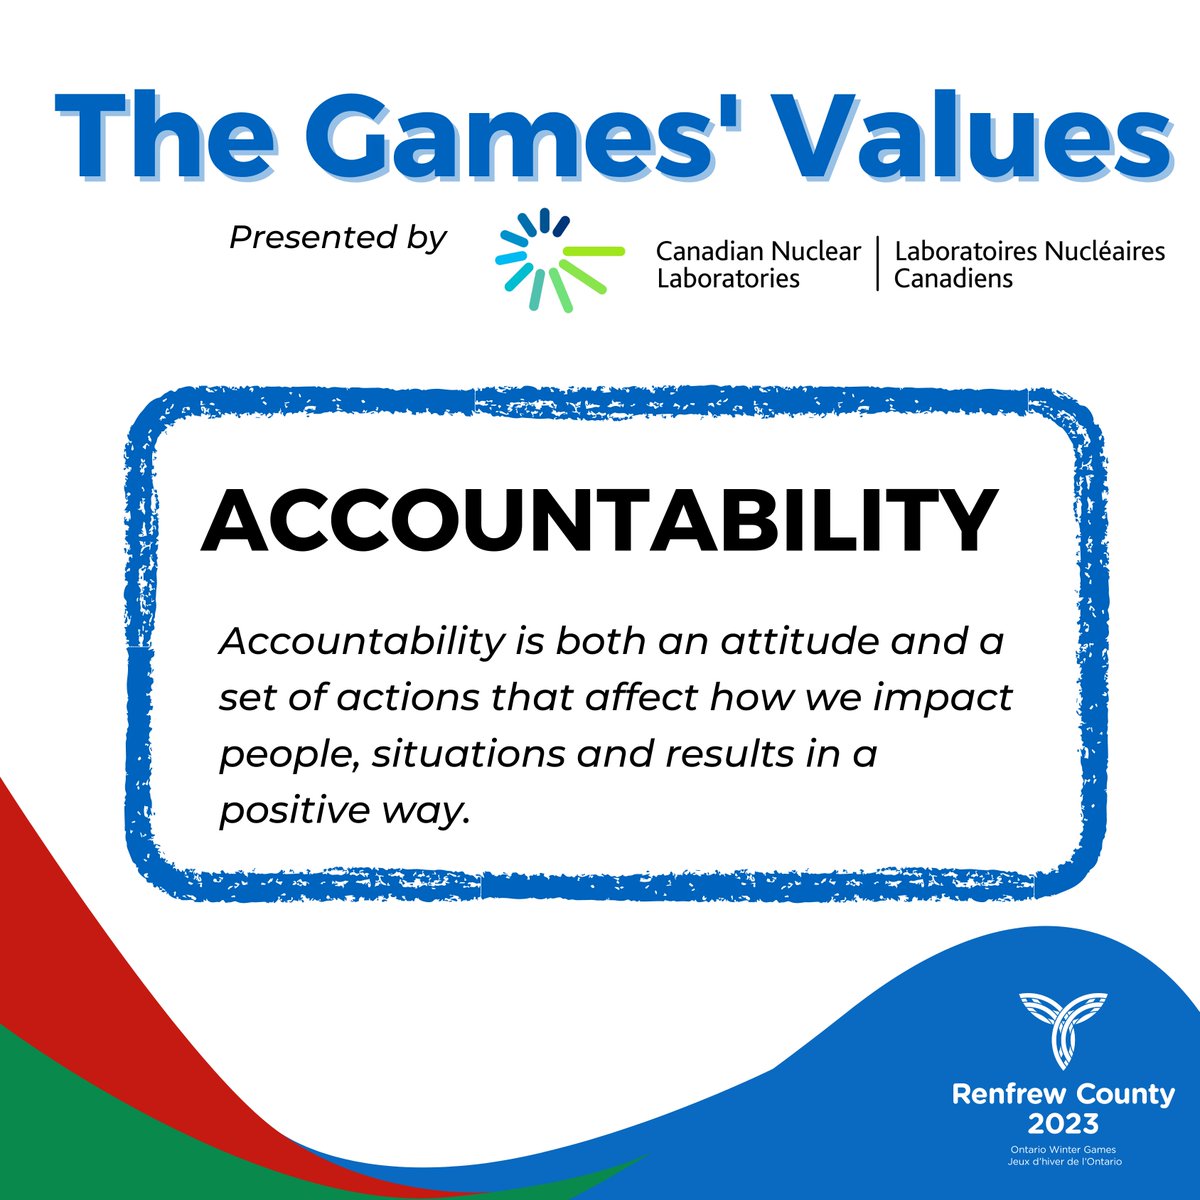 ICYMI: Take Accountability for actions, learn from your mistakes and own your decisions. Accountability is a key value for @CNL_LNC and Games!
For more information on what the @CNL_LNC Games’ Values mean visit: countyofrenfrew.on.ca/en/news/renfre…